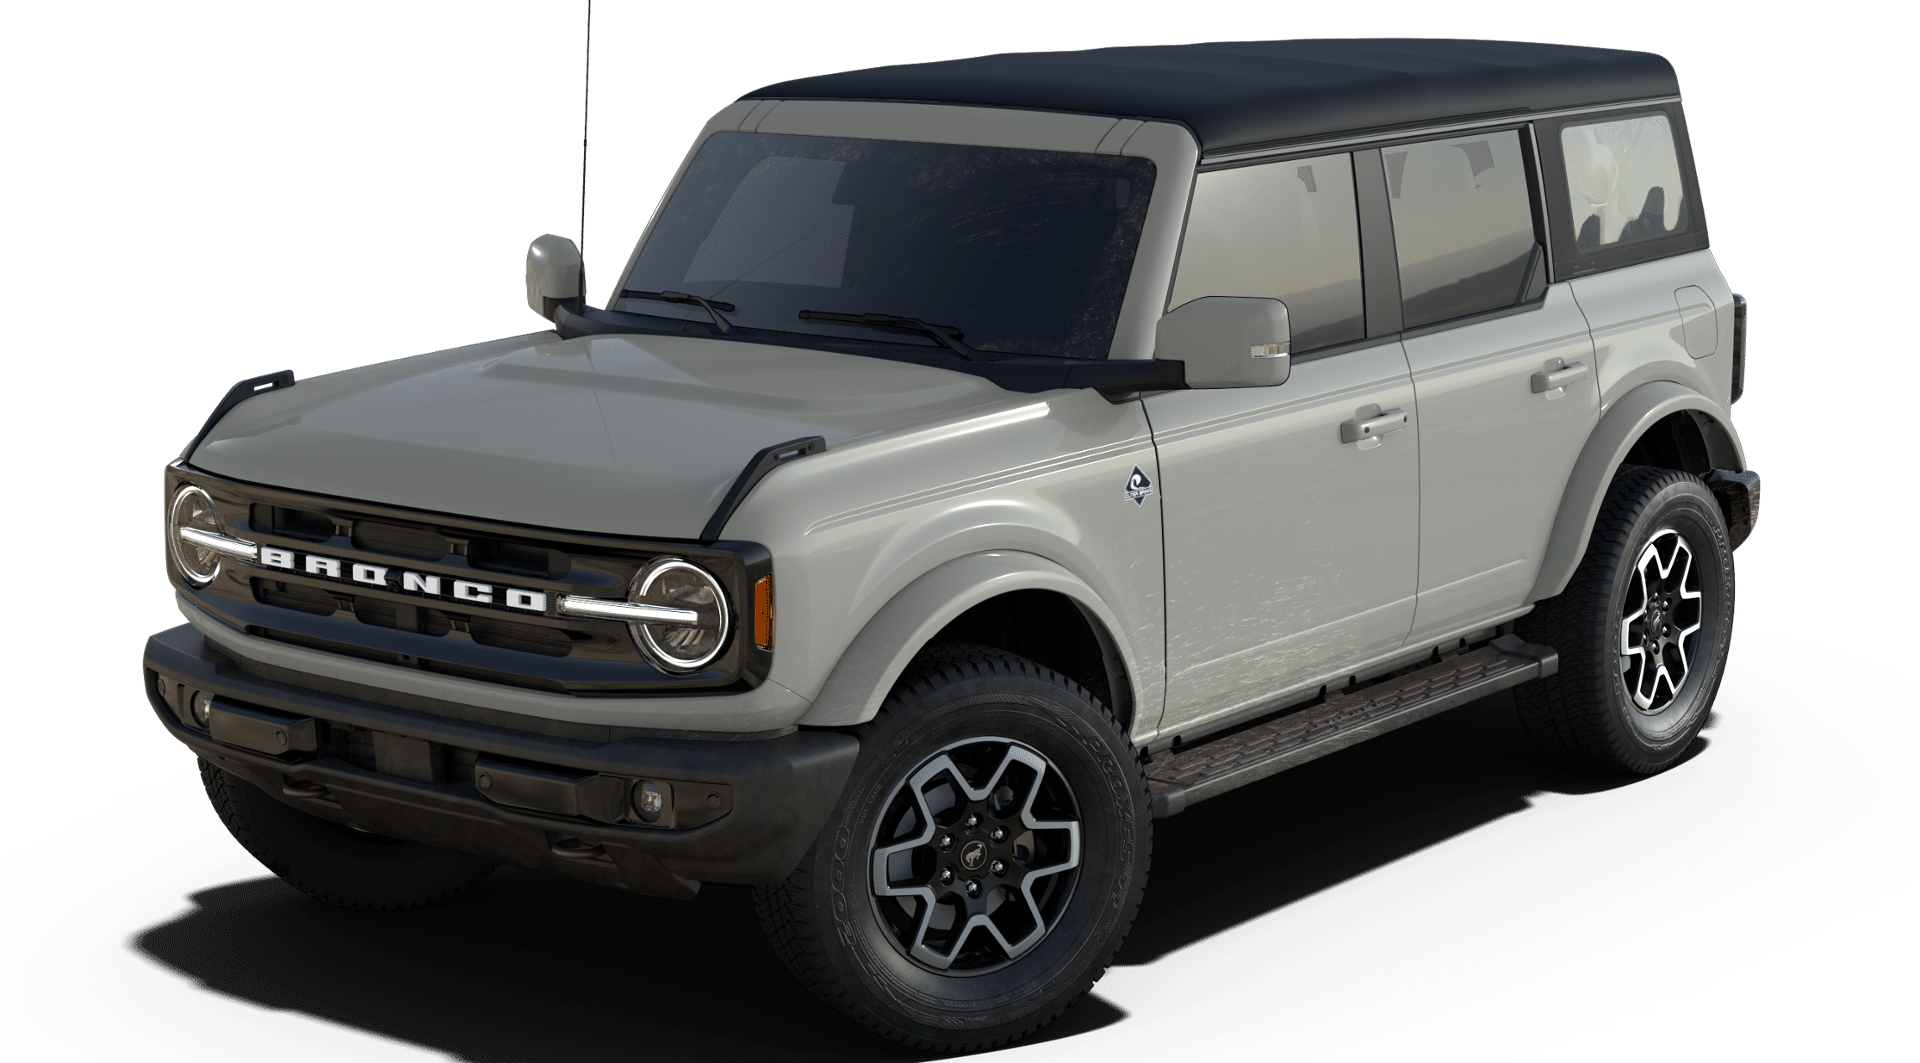 New 2022 Ford Bronco Convertible Stock: 104055